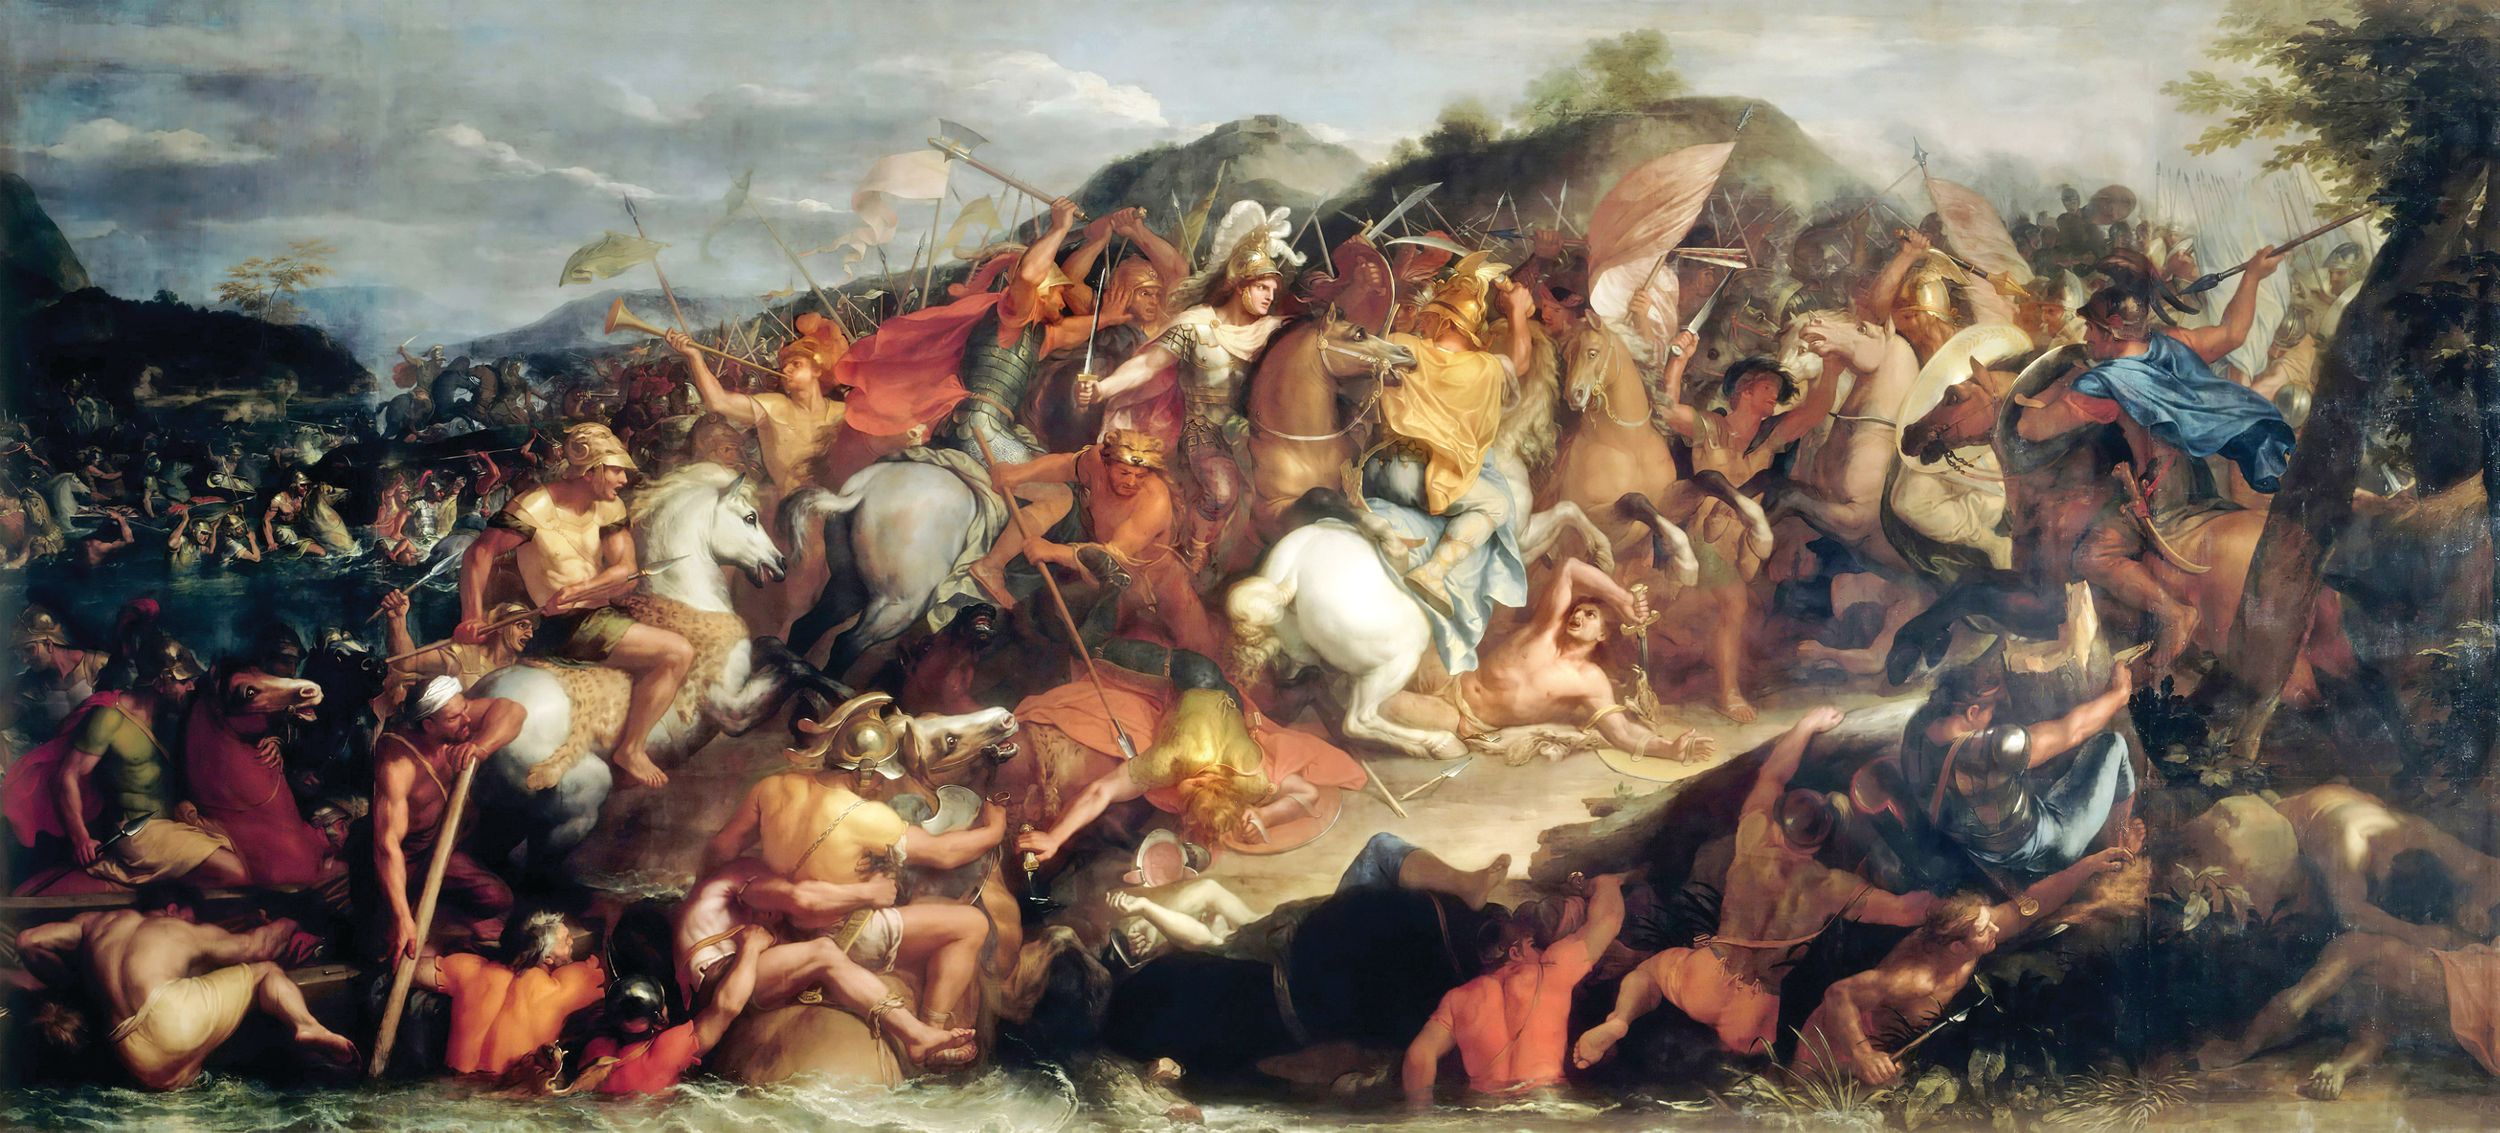 Battle of Granicus 334 BC, by Charles Le Brun depicts Alexander the Great at the center of the cavalry battle. The rout on the banks of the Granicus—now called the Biga River in modern Turkey—gave him a firm foothold in Asia. To neutralize Persian naval superiority,  Alexander decided  to destroy its maritime provinces and he then turned south toward the Turkish seacoast.